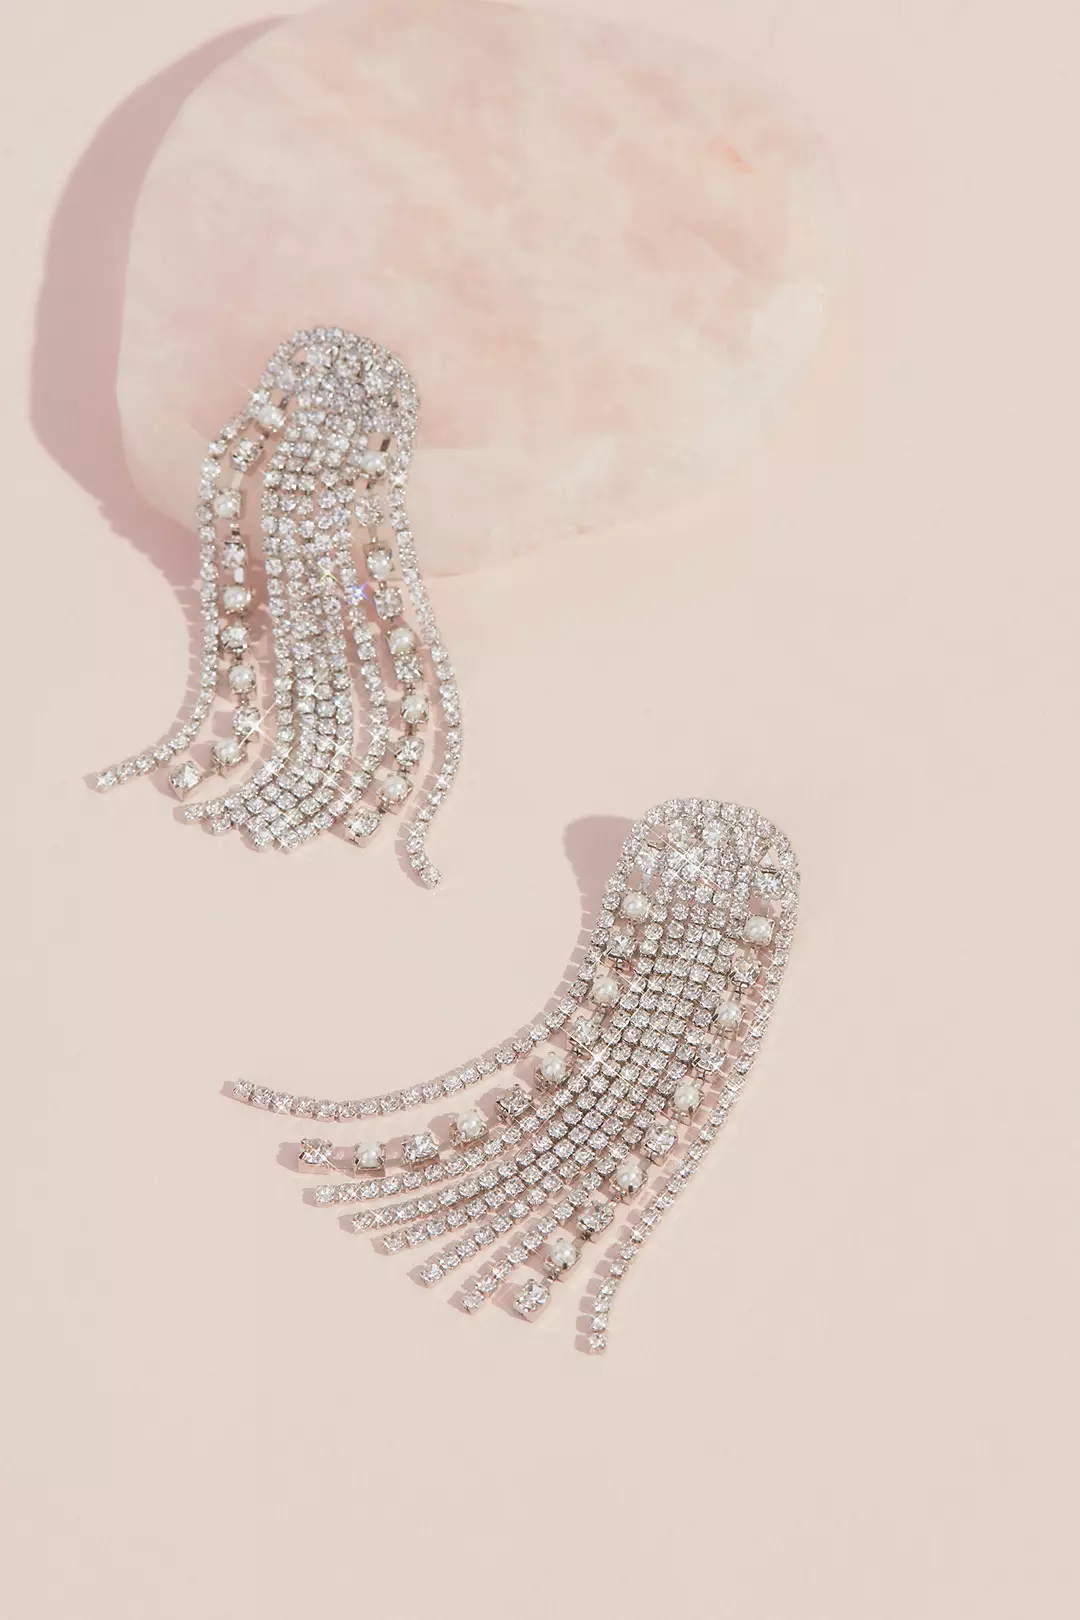 Arched Crystal Fringe Earrings Image